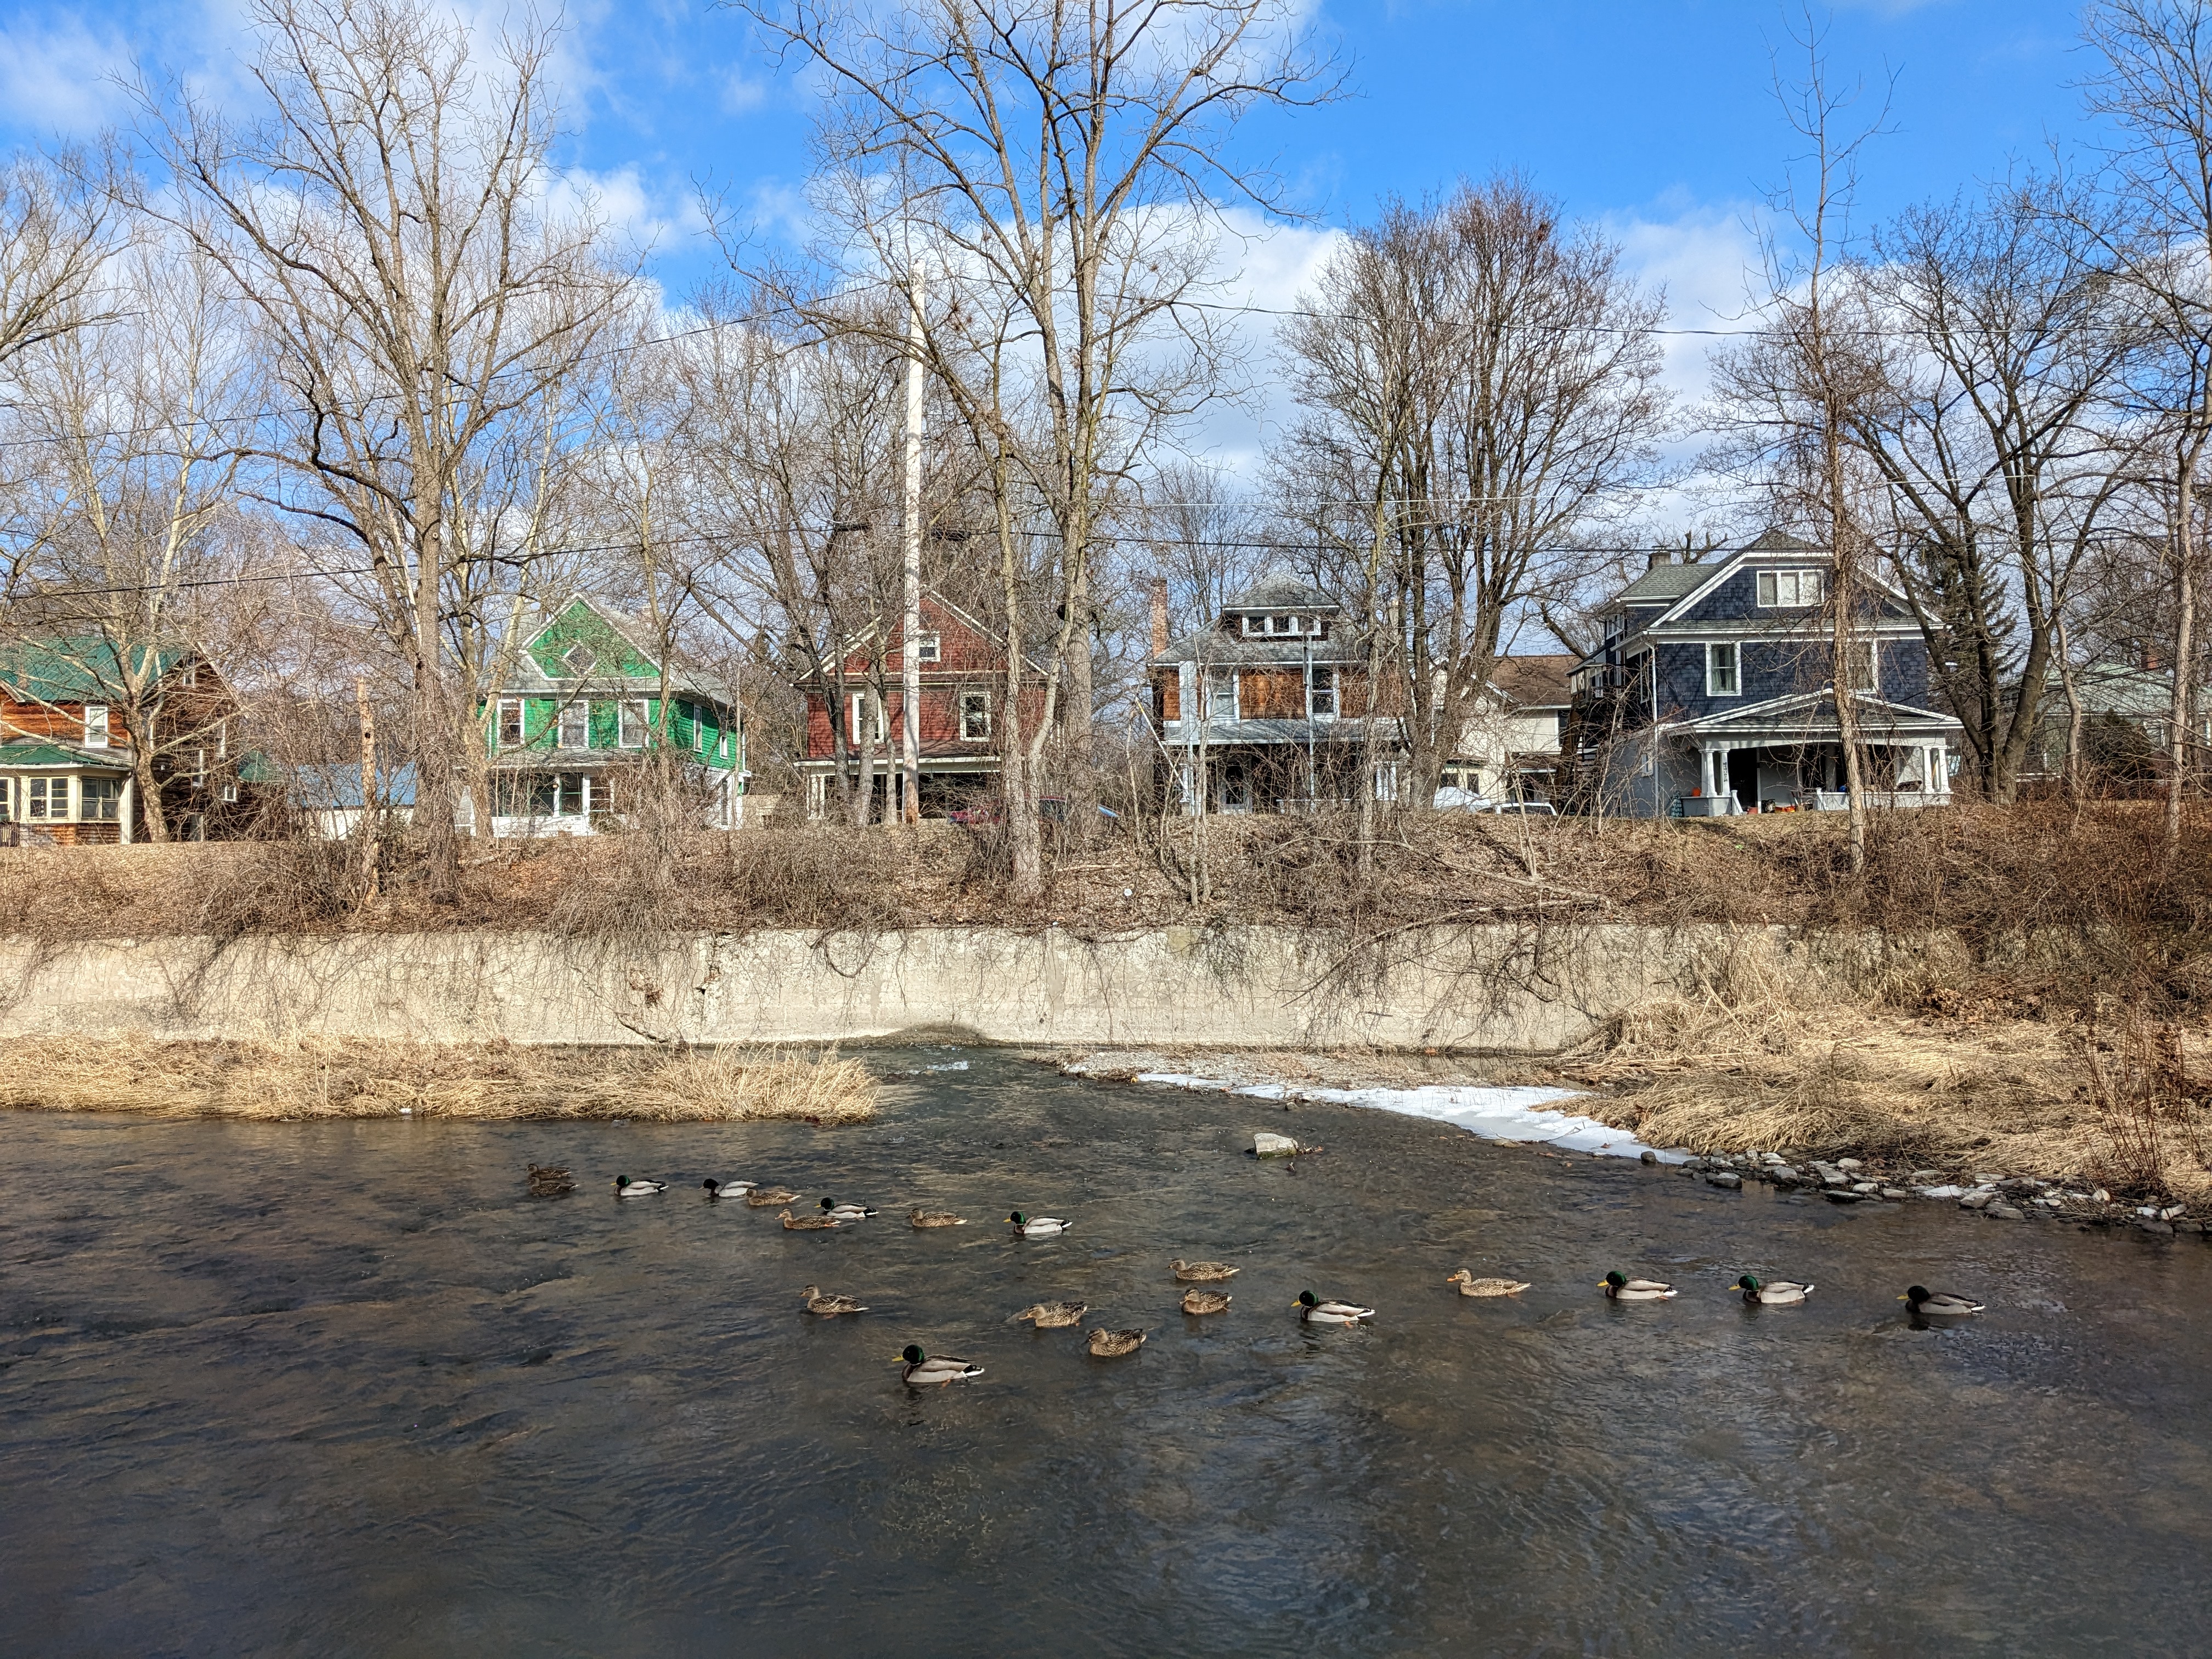 Ducks swimming along Six Mile Creek in front of a floodwall protecting a row of single family homes.